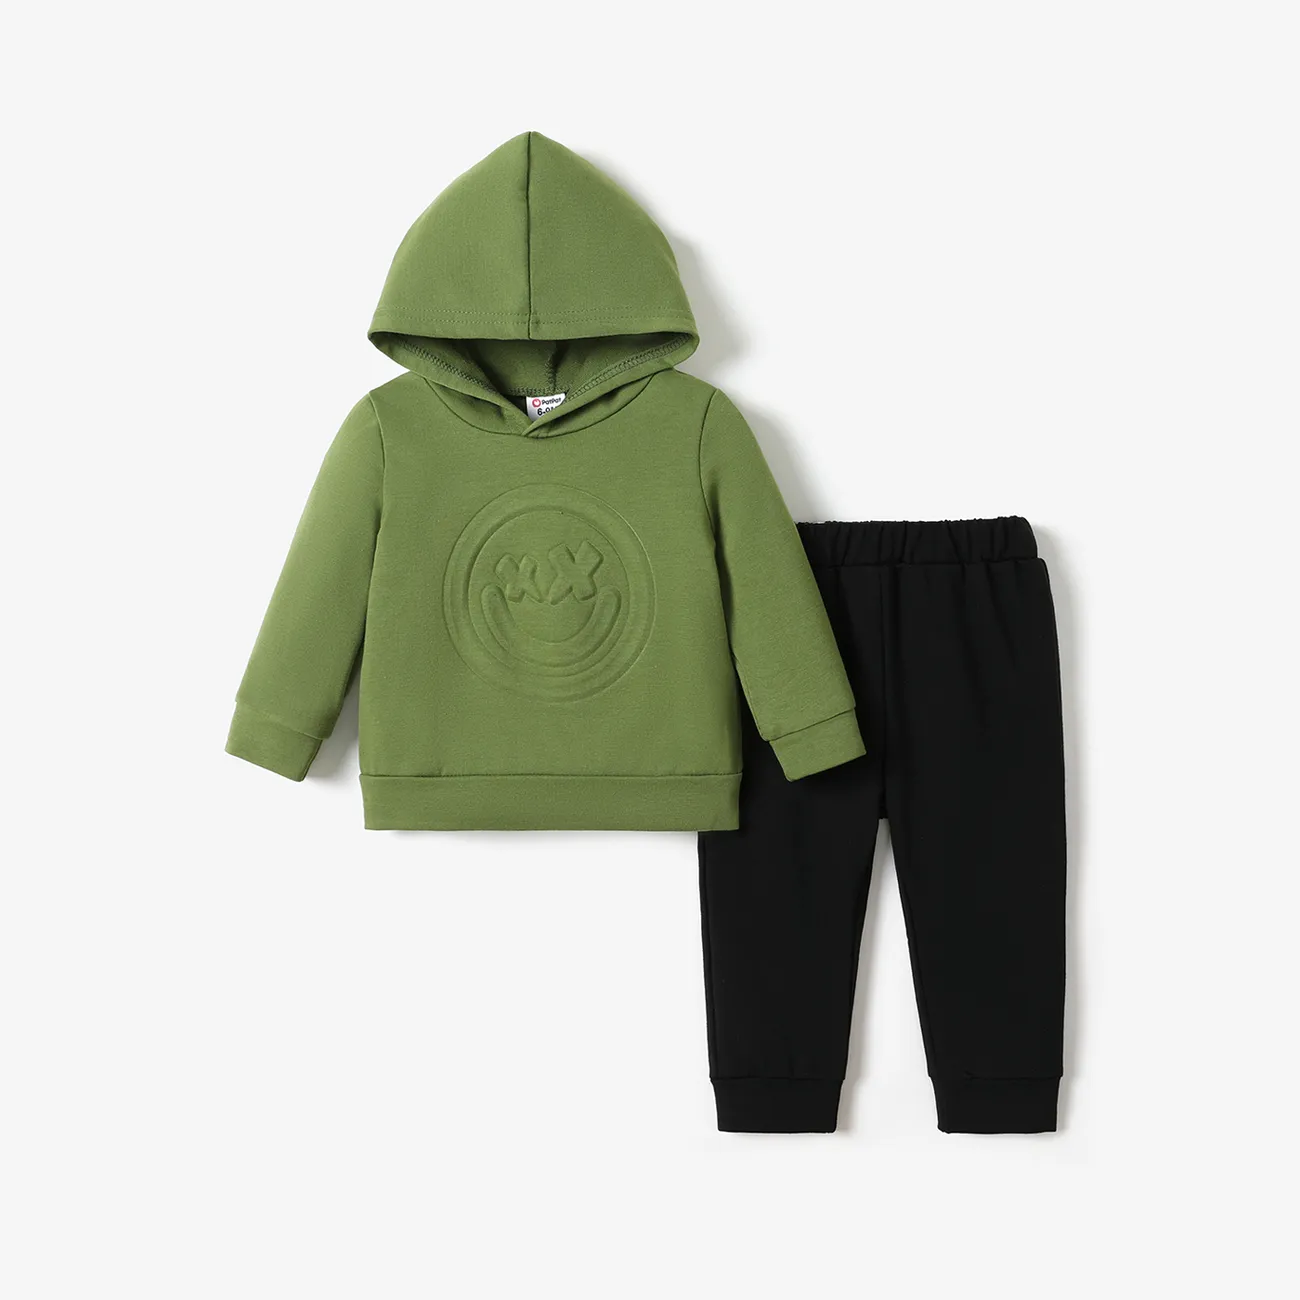 2pcs Baby Boy Long-sleeve Graphic Hoodie and Sweatpants Set Army green big image 1